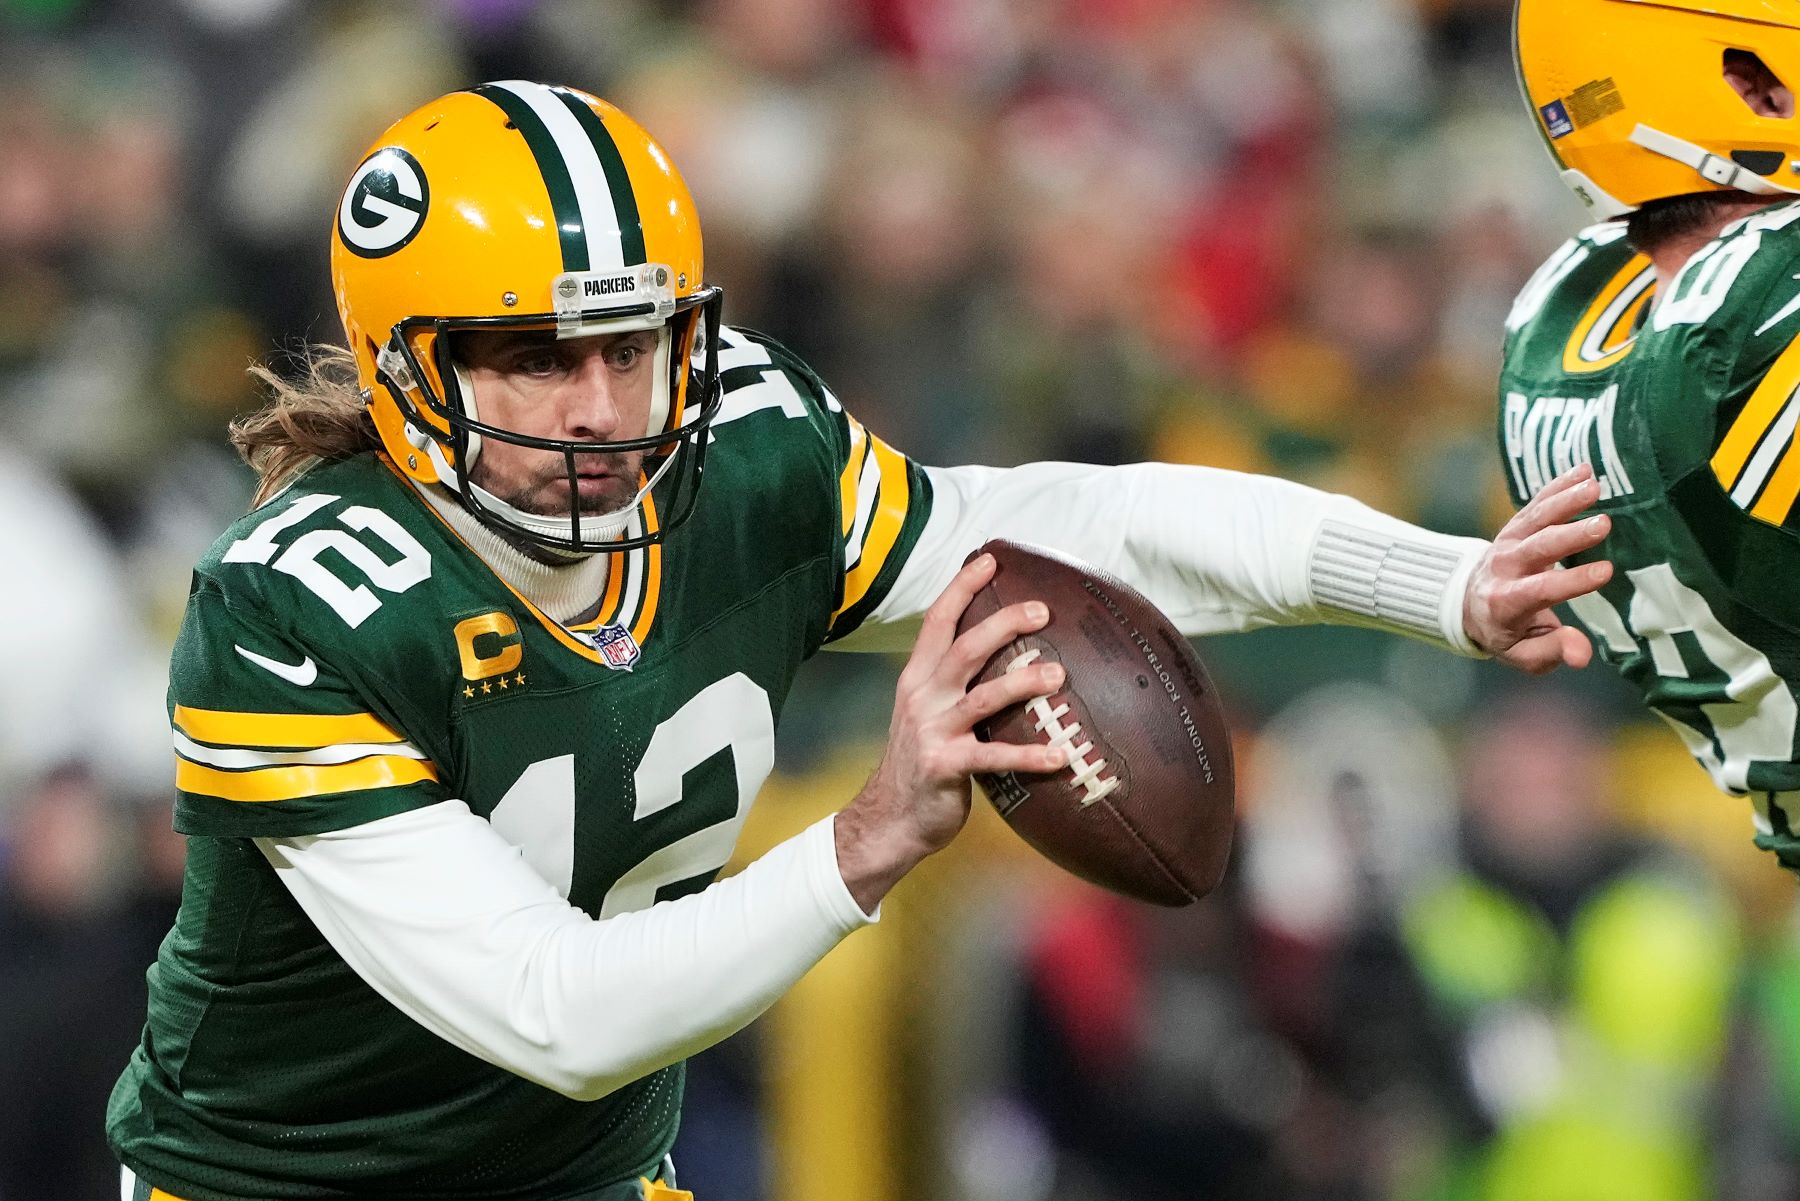 Quarterback Aaron Rodgers as #12 of the Green Bay Packers NFL team during a game against the San Francisco 49ers